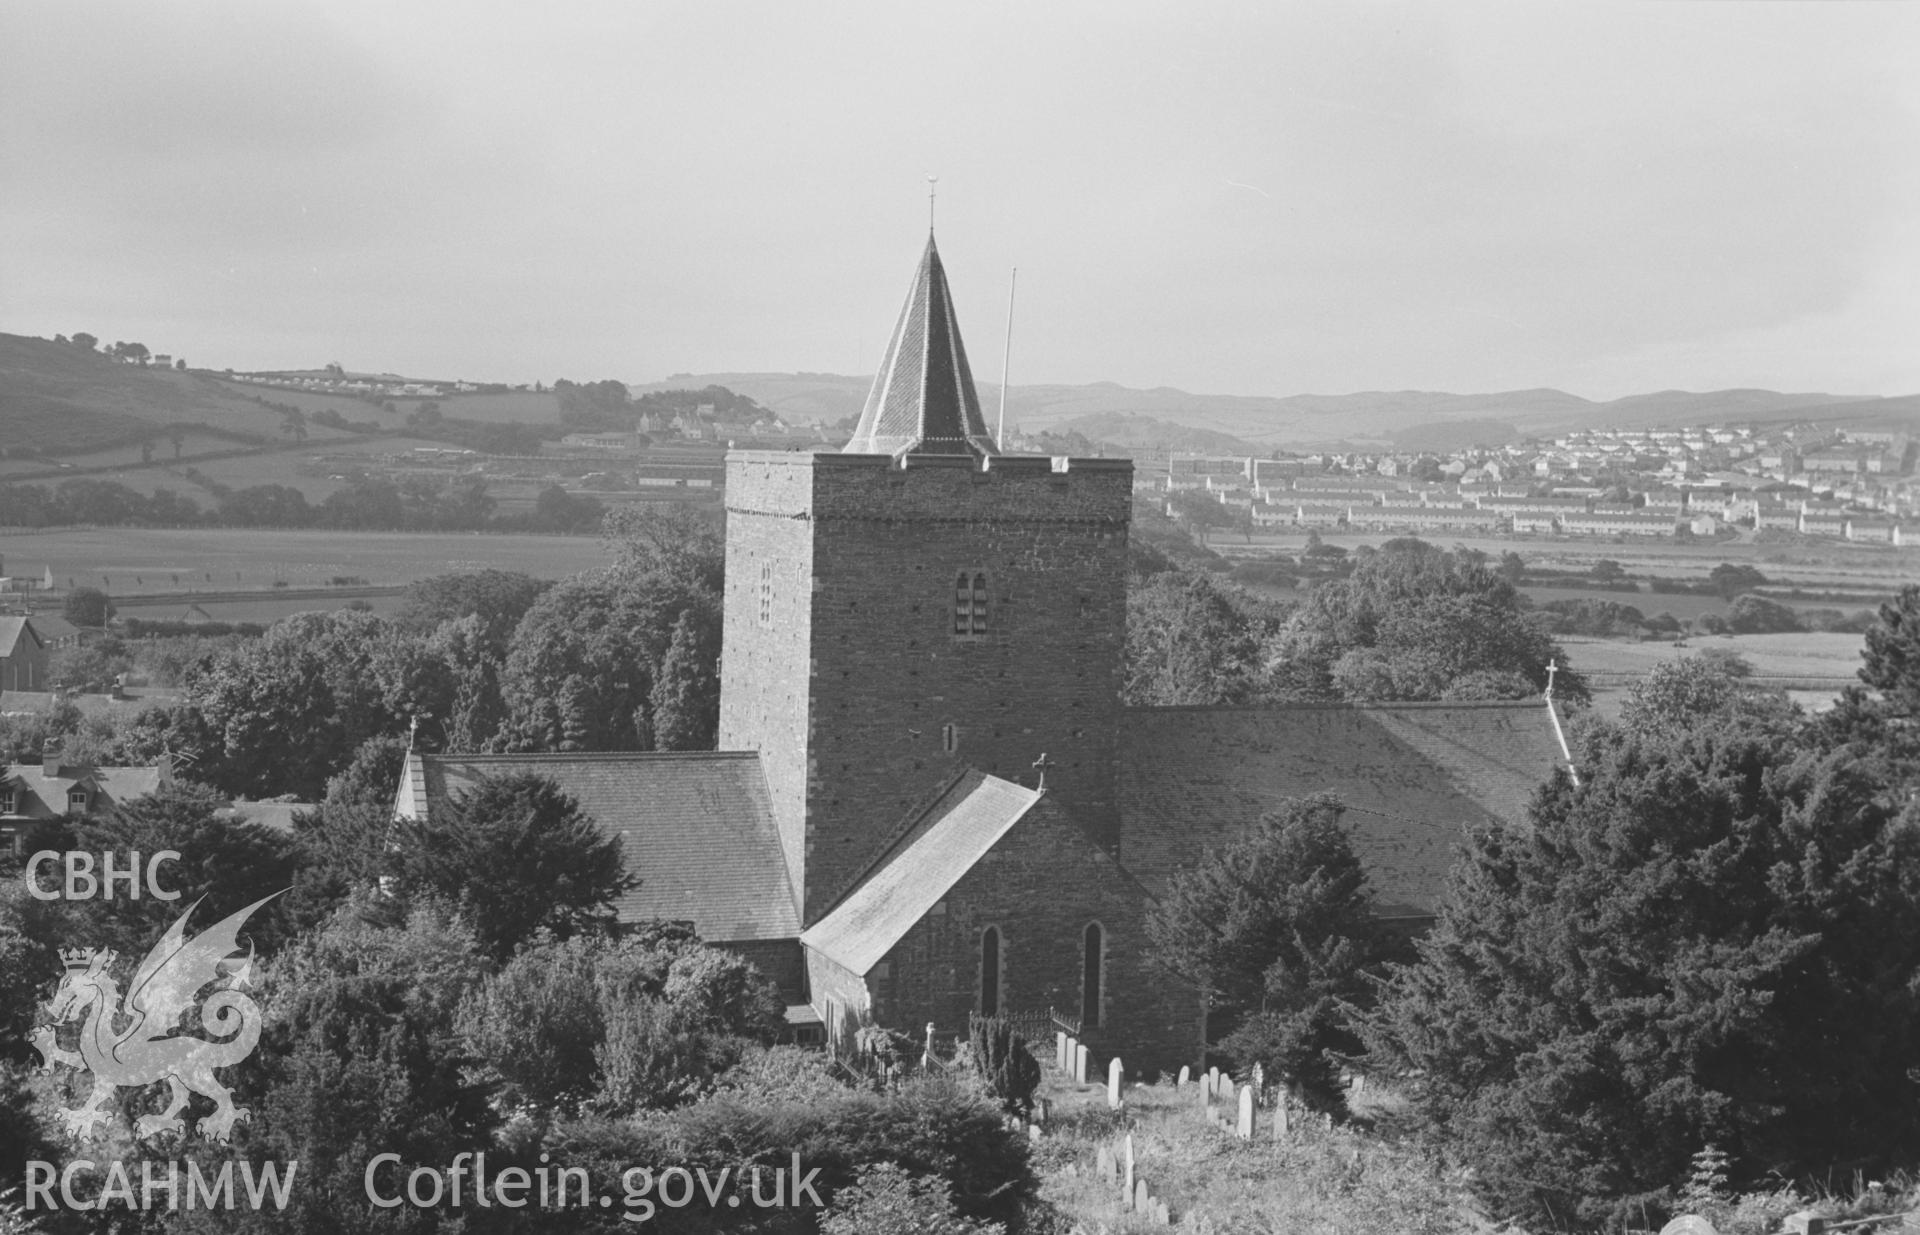 Digital copy of a black and white negative showing exterior view of St. Padarn's church, Llanbadarn, Aberystwyth, looking towards Penparcau. (View looking west from Grid Reference SN 599 811). Photographed by Arthur O. Chater in August 1967.